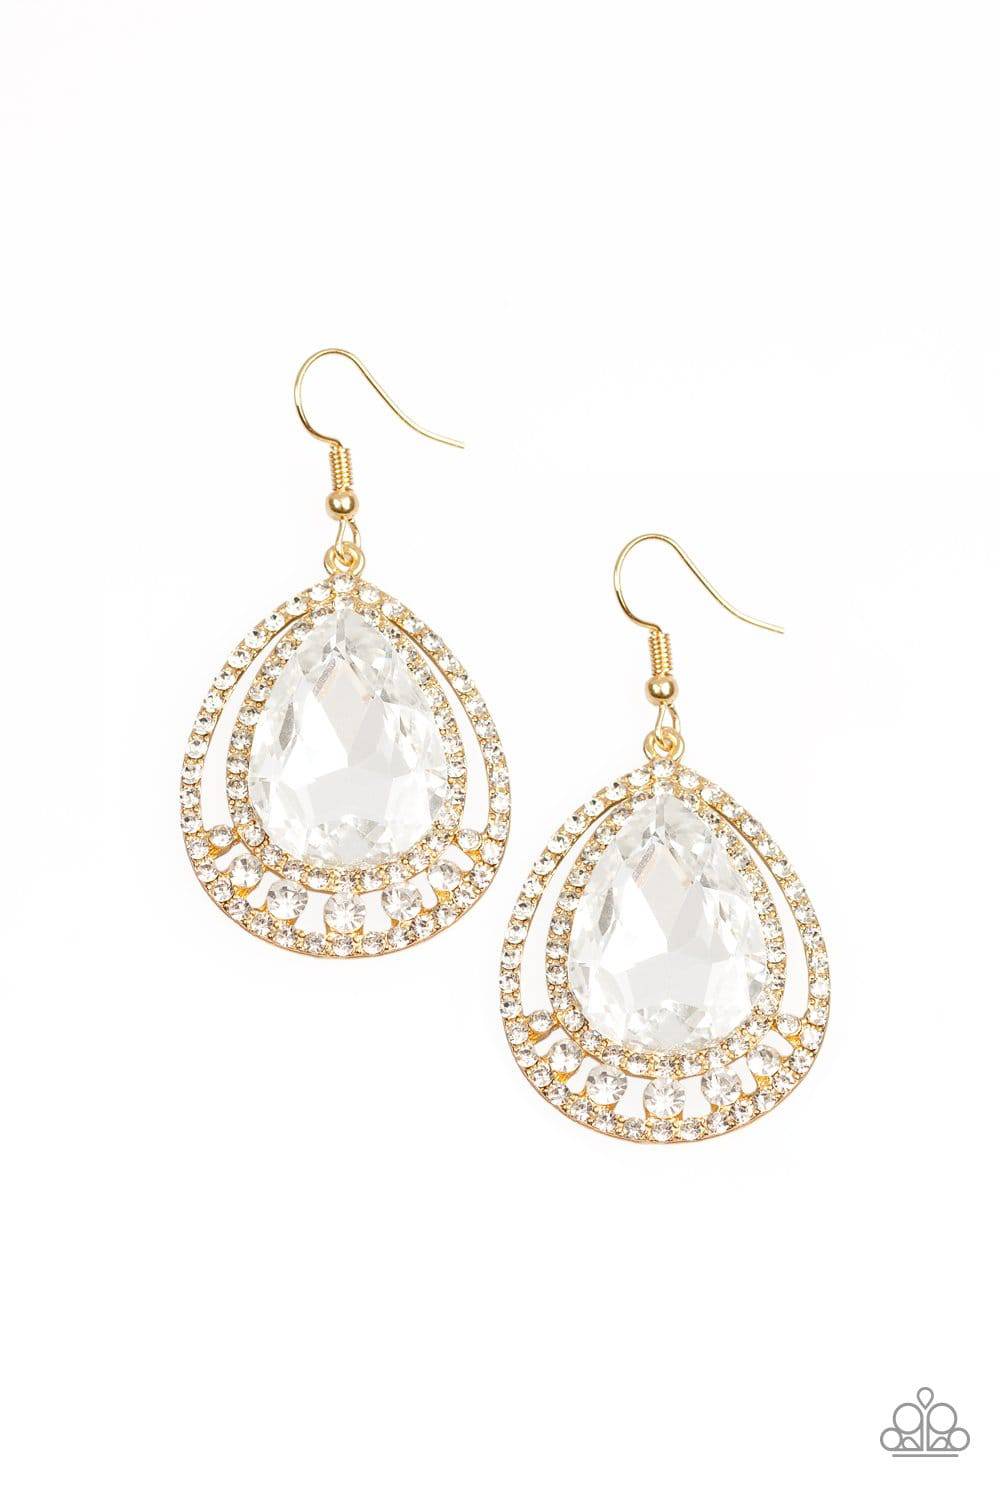 All Rise For Her Majesty - Gold & White Rhinestone Earrings - Paparazzi Accessories - GlaMarous Titi Jewels